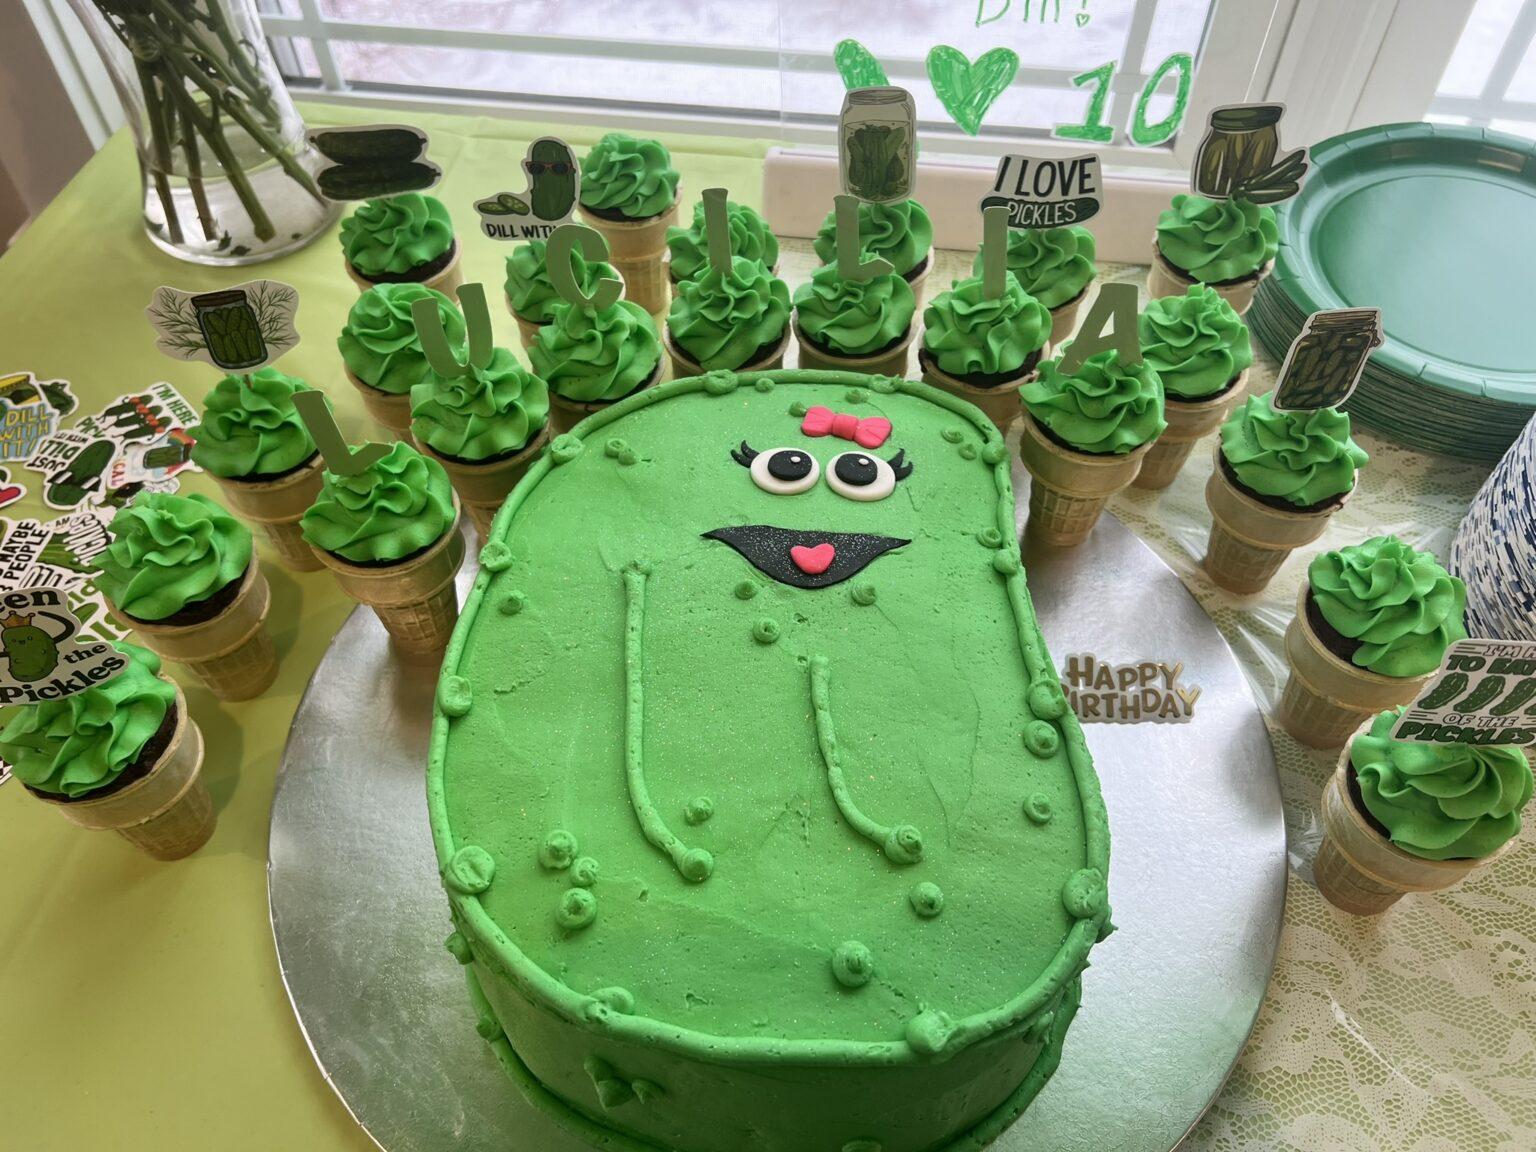 A Pickle Themed Birthday Party - We Like To Party Plan